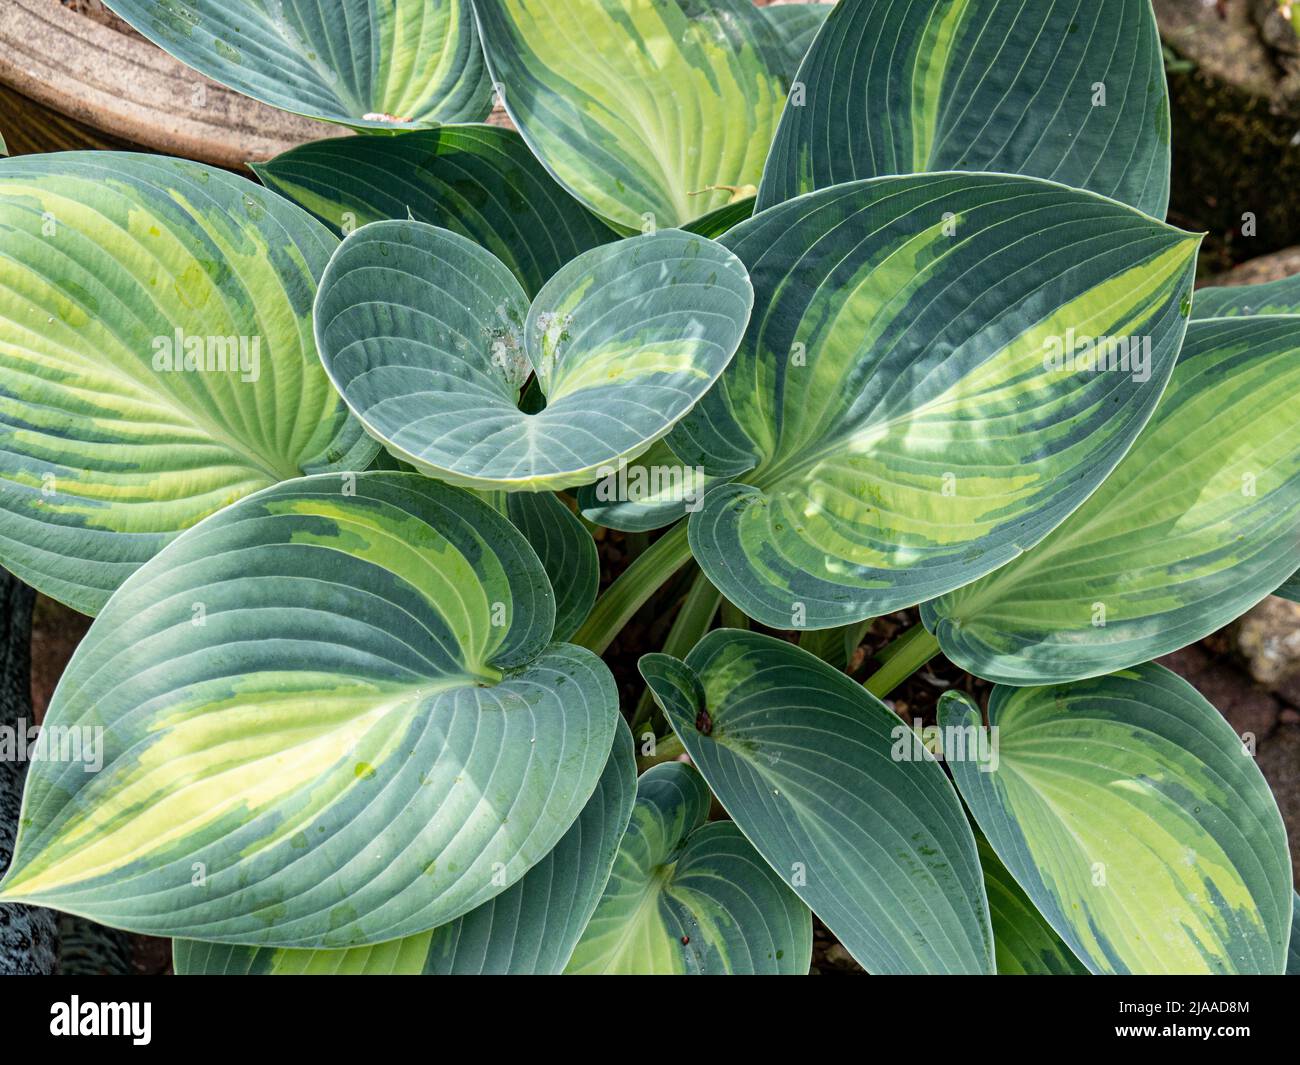 The striking green and pale yellow leaves of Hosta June Stock Photo